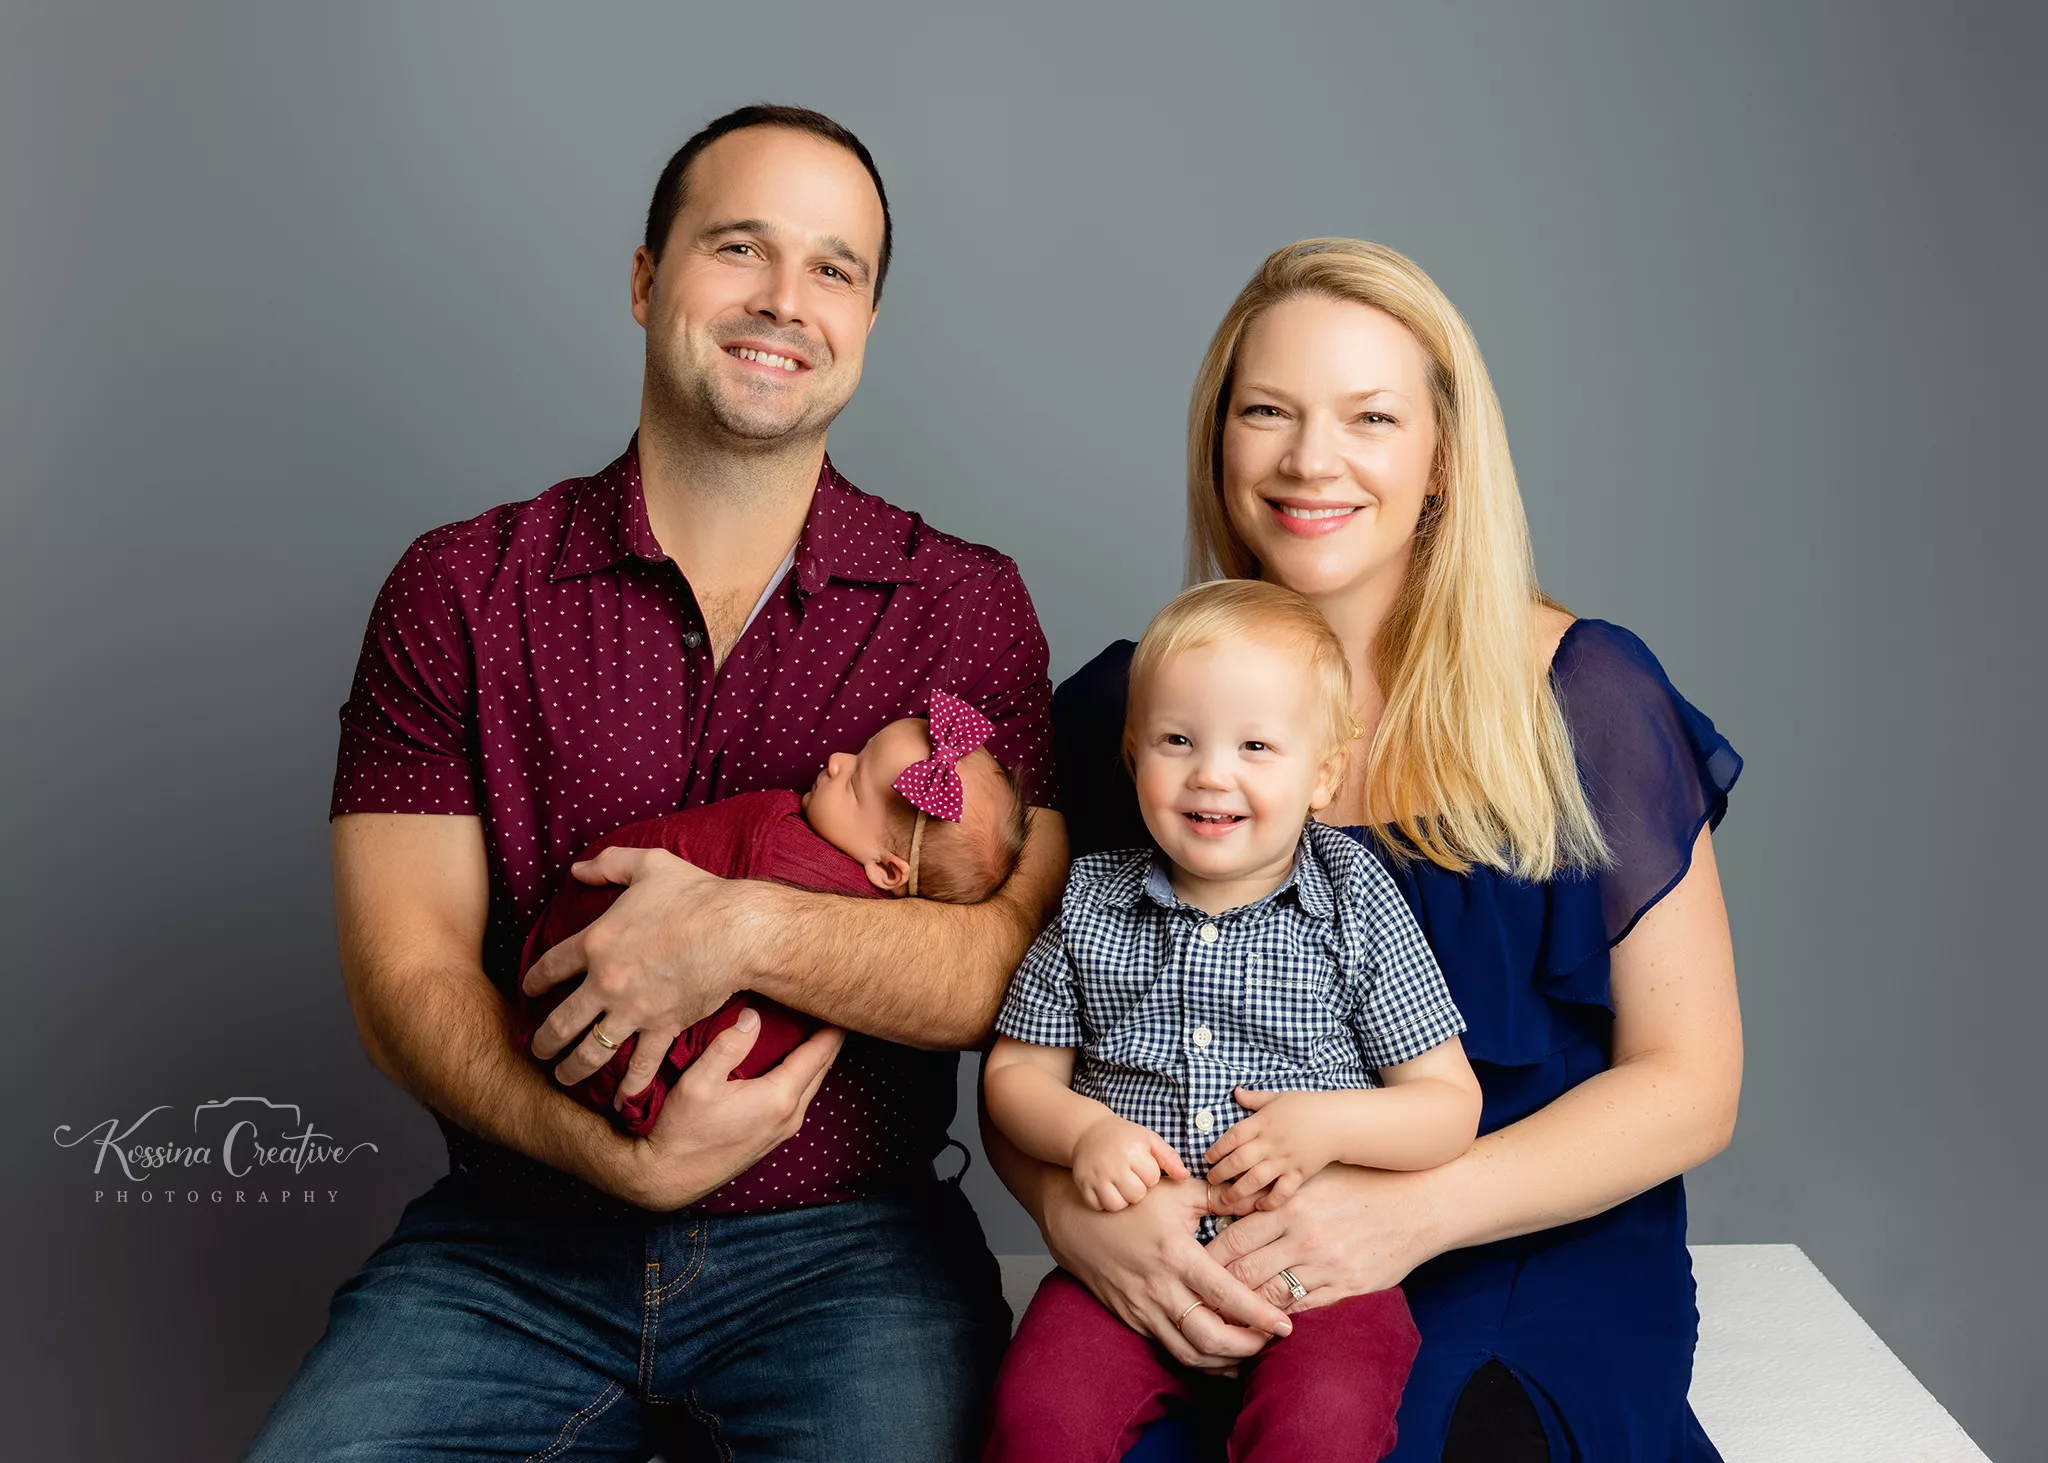 Orlando Family Newborn Photographer Baby Kid Photo studio family off our mom dad big brother baby